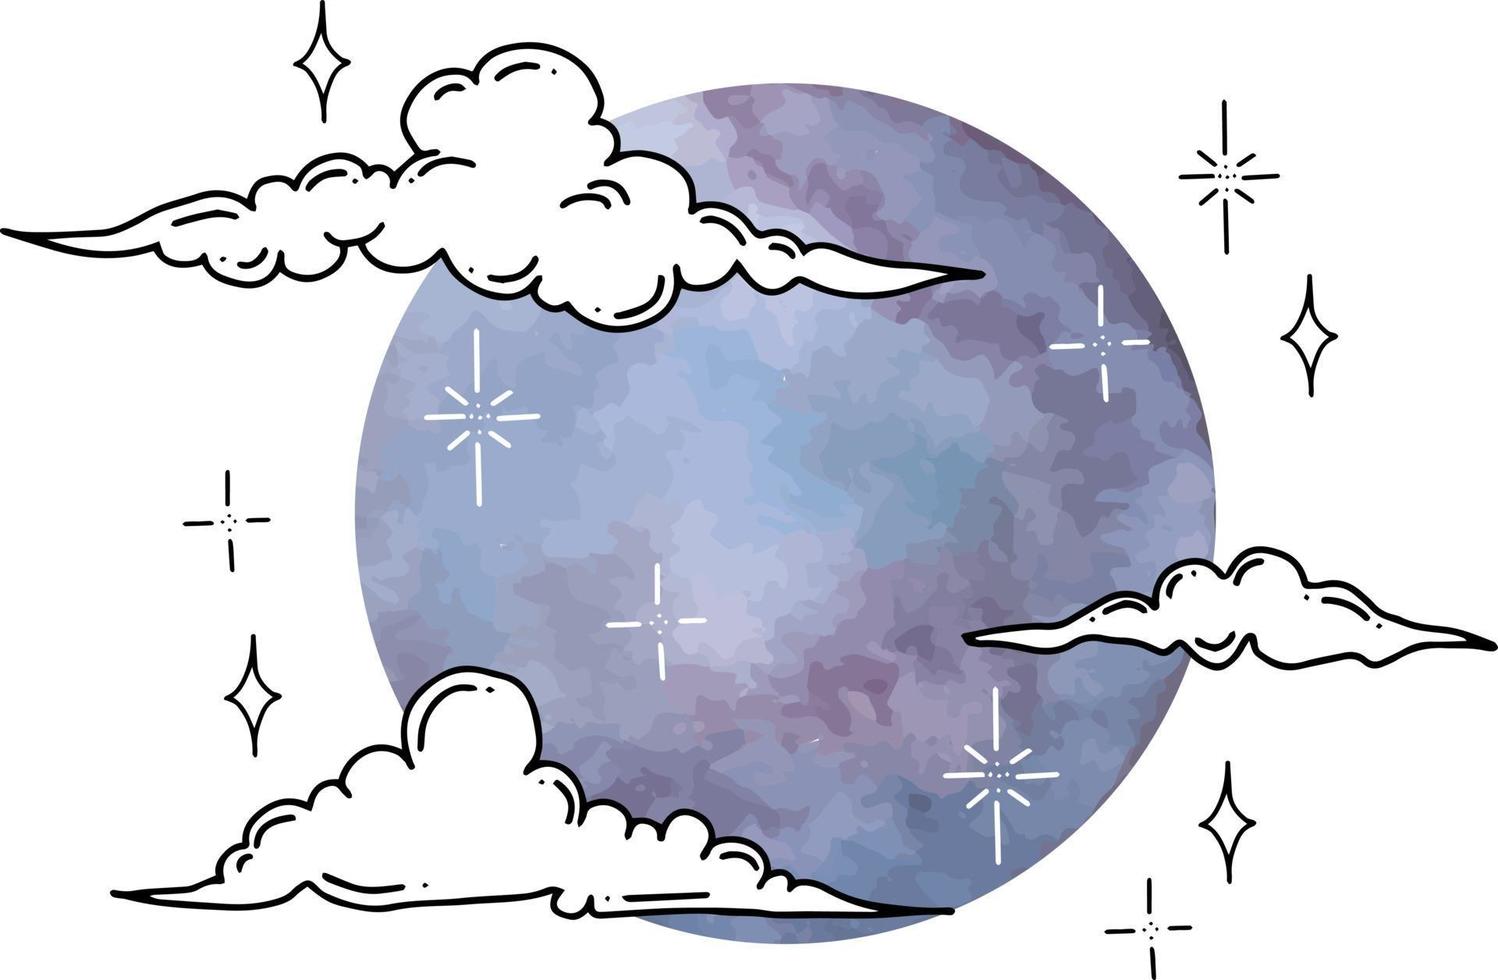 Vector graphics of clouds and stars with watercolor moon. Isolated vector illustration character set.